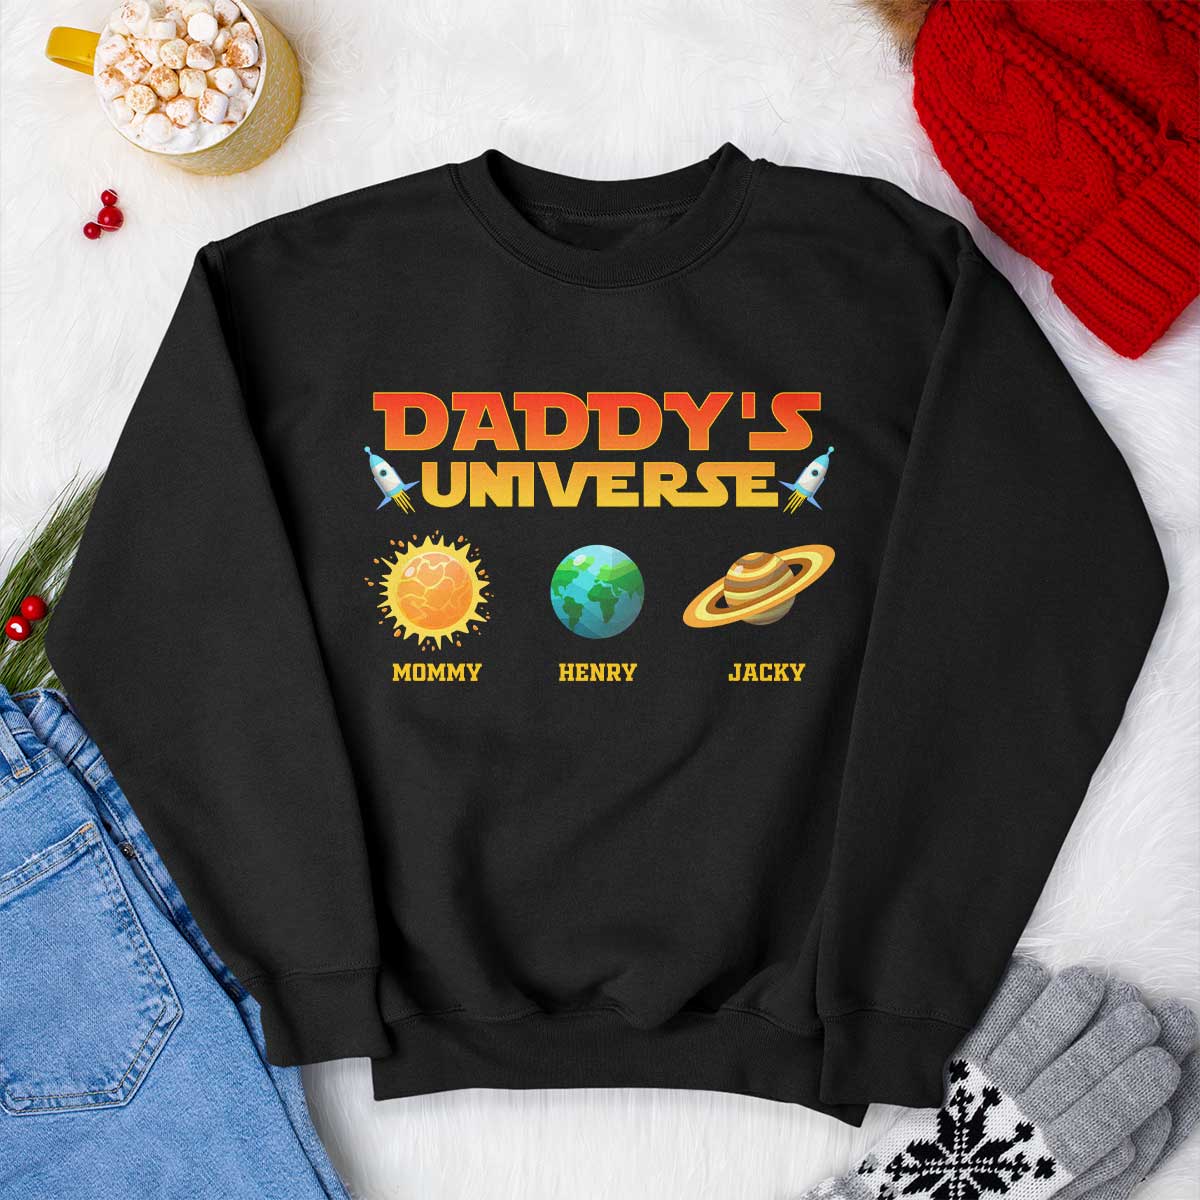 Daddy's Universe Personalized Shirt